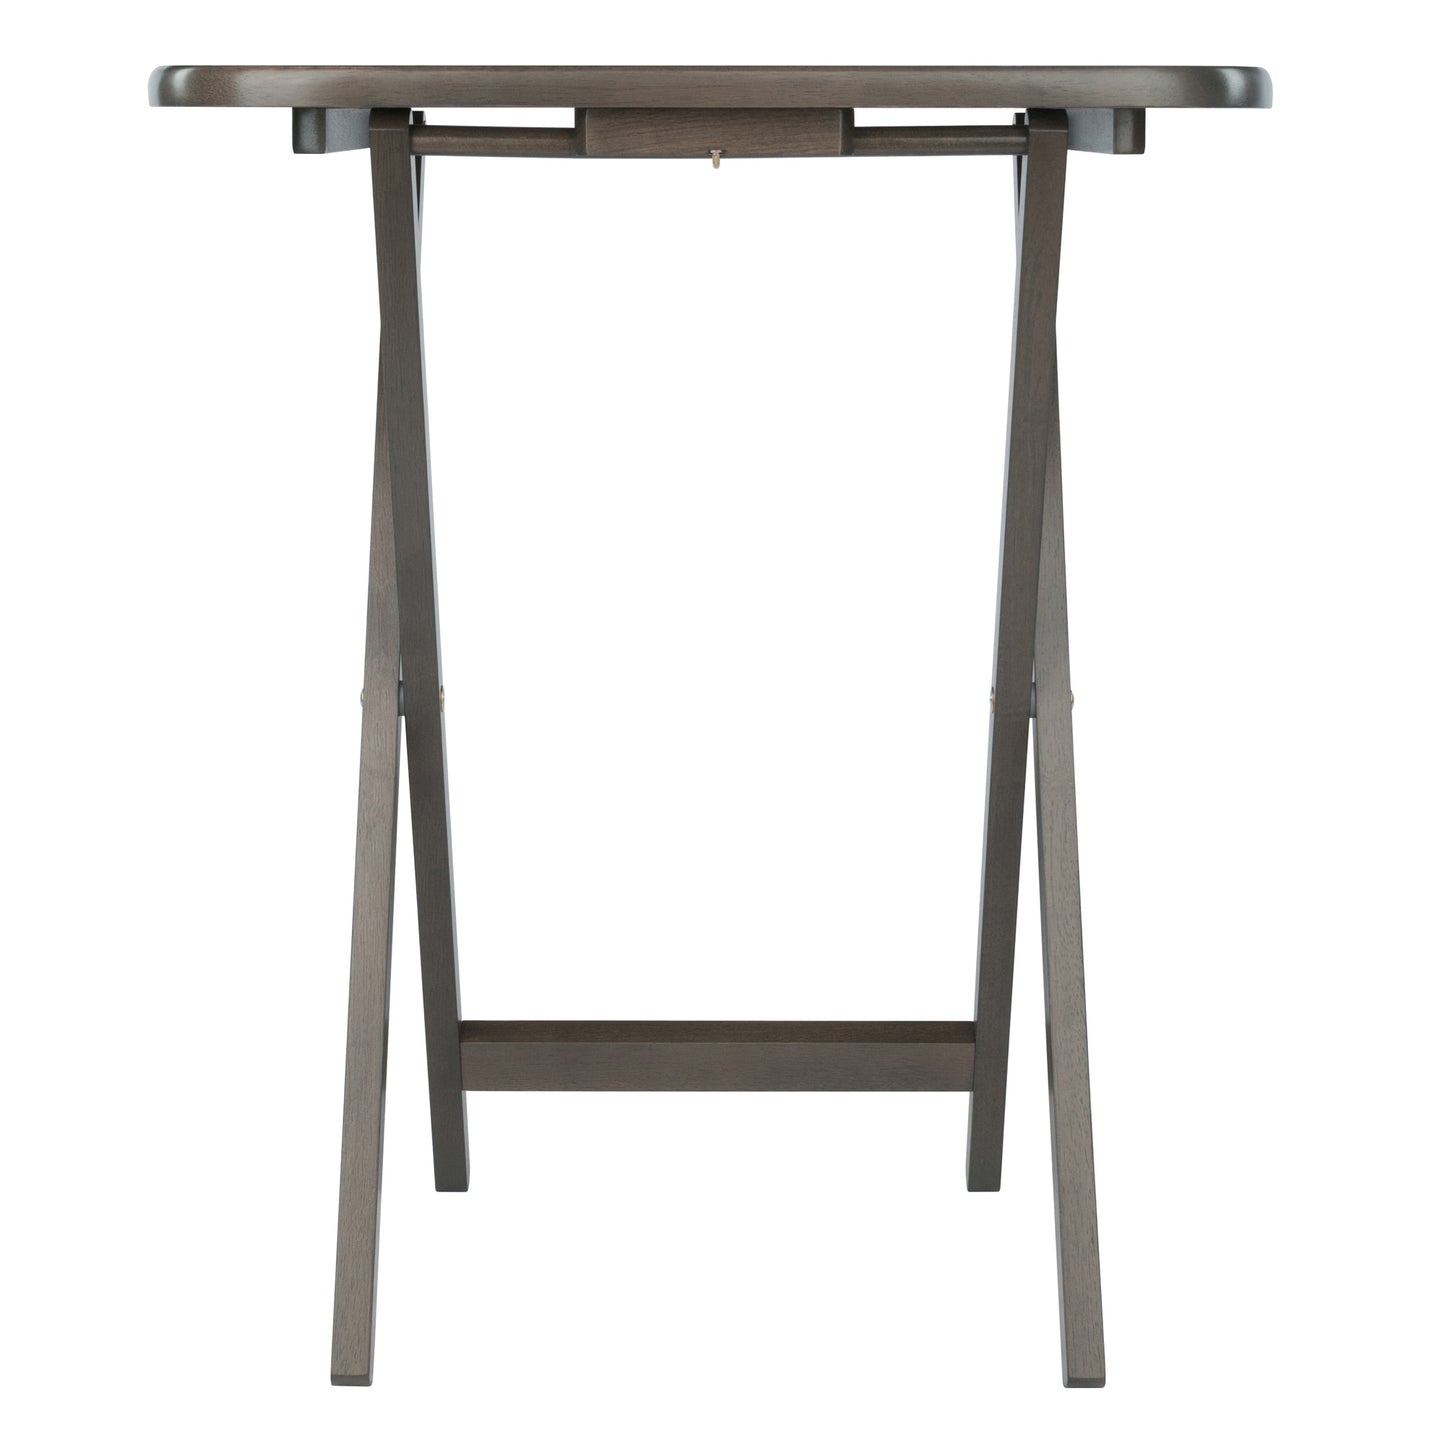 Lucca 5-Pc Snack Table Set; Oyster Gray